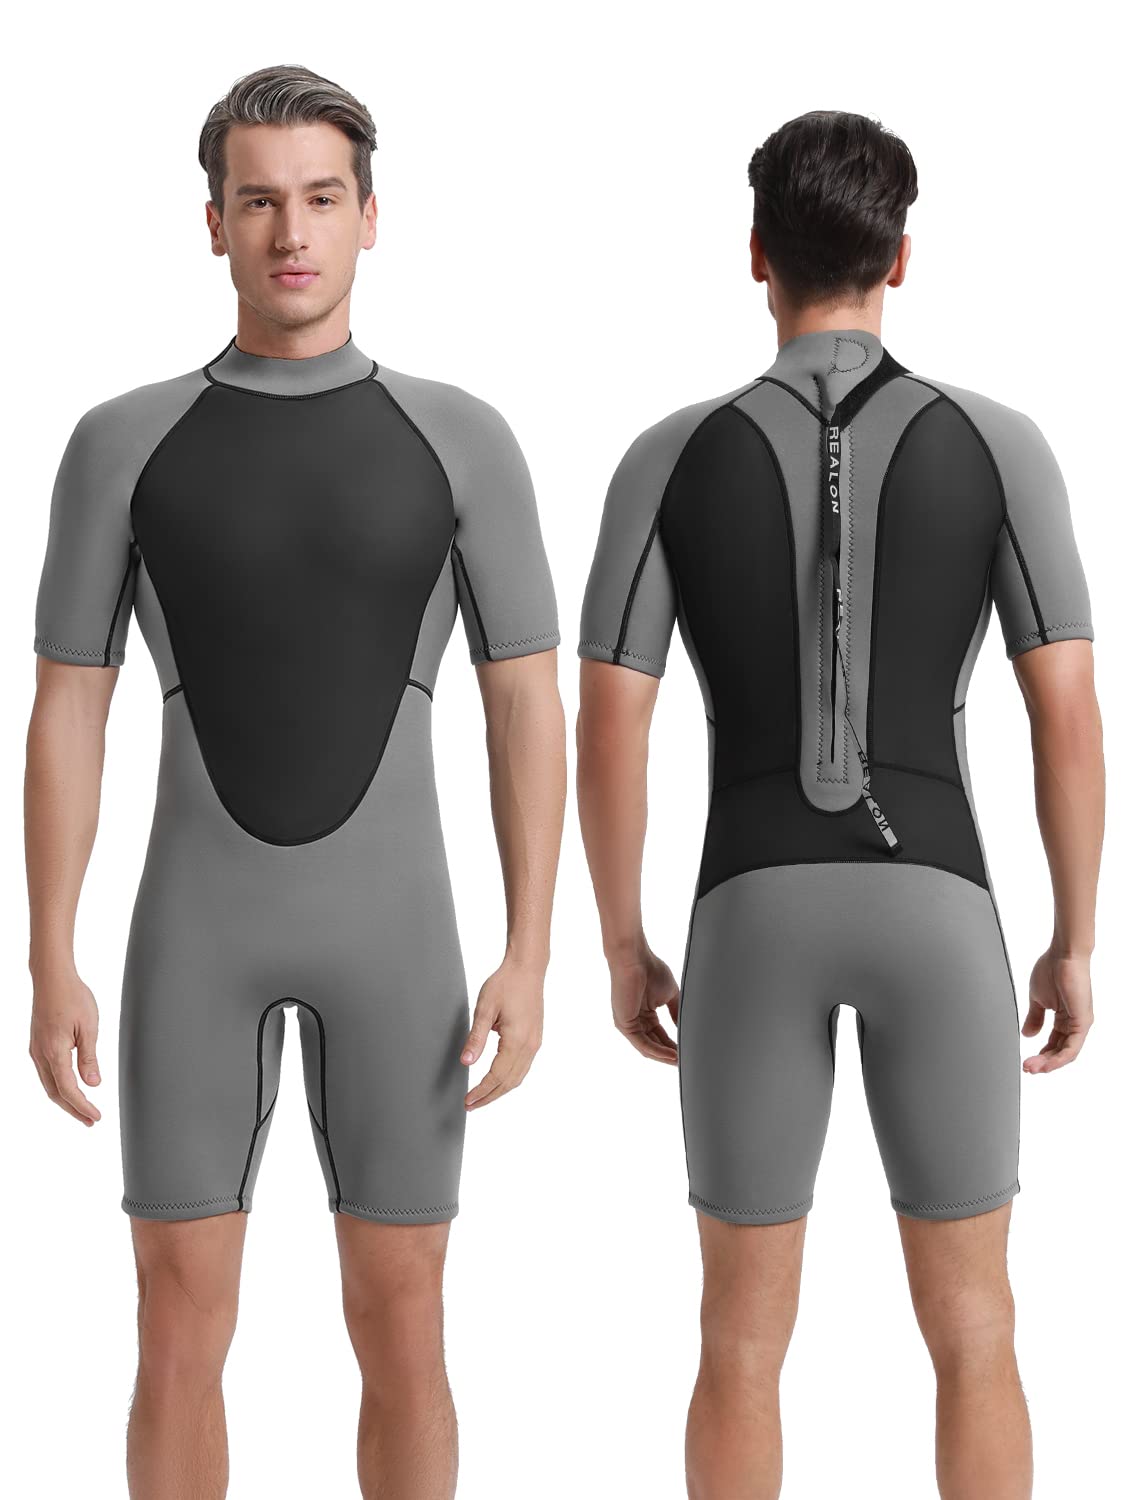 REALON Shorty Wetsuit Women and Men 3mm, 2mm Short Sleeves Neoprene Surfing  Wet Suits, Adult Shortie for Snorkeling, Kayaking, Boarding, Swimming 3mm  Shorty Grey Medium